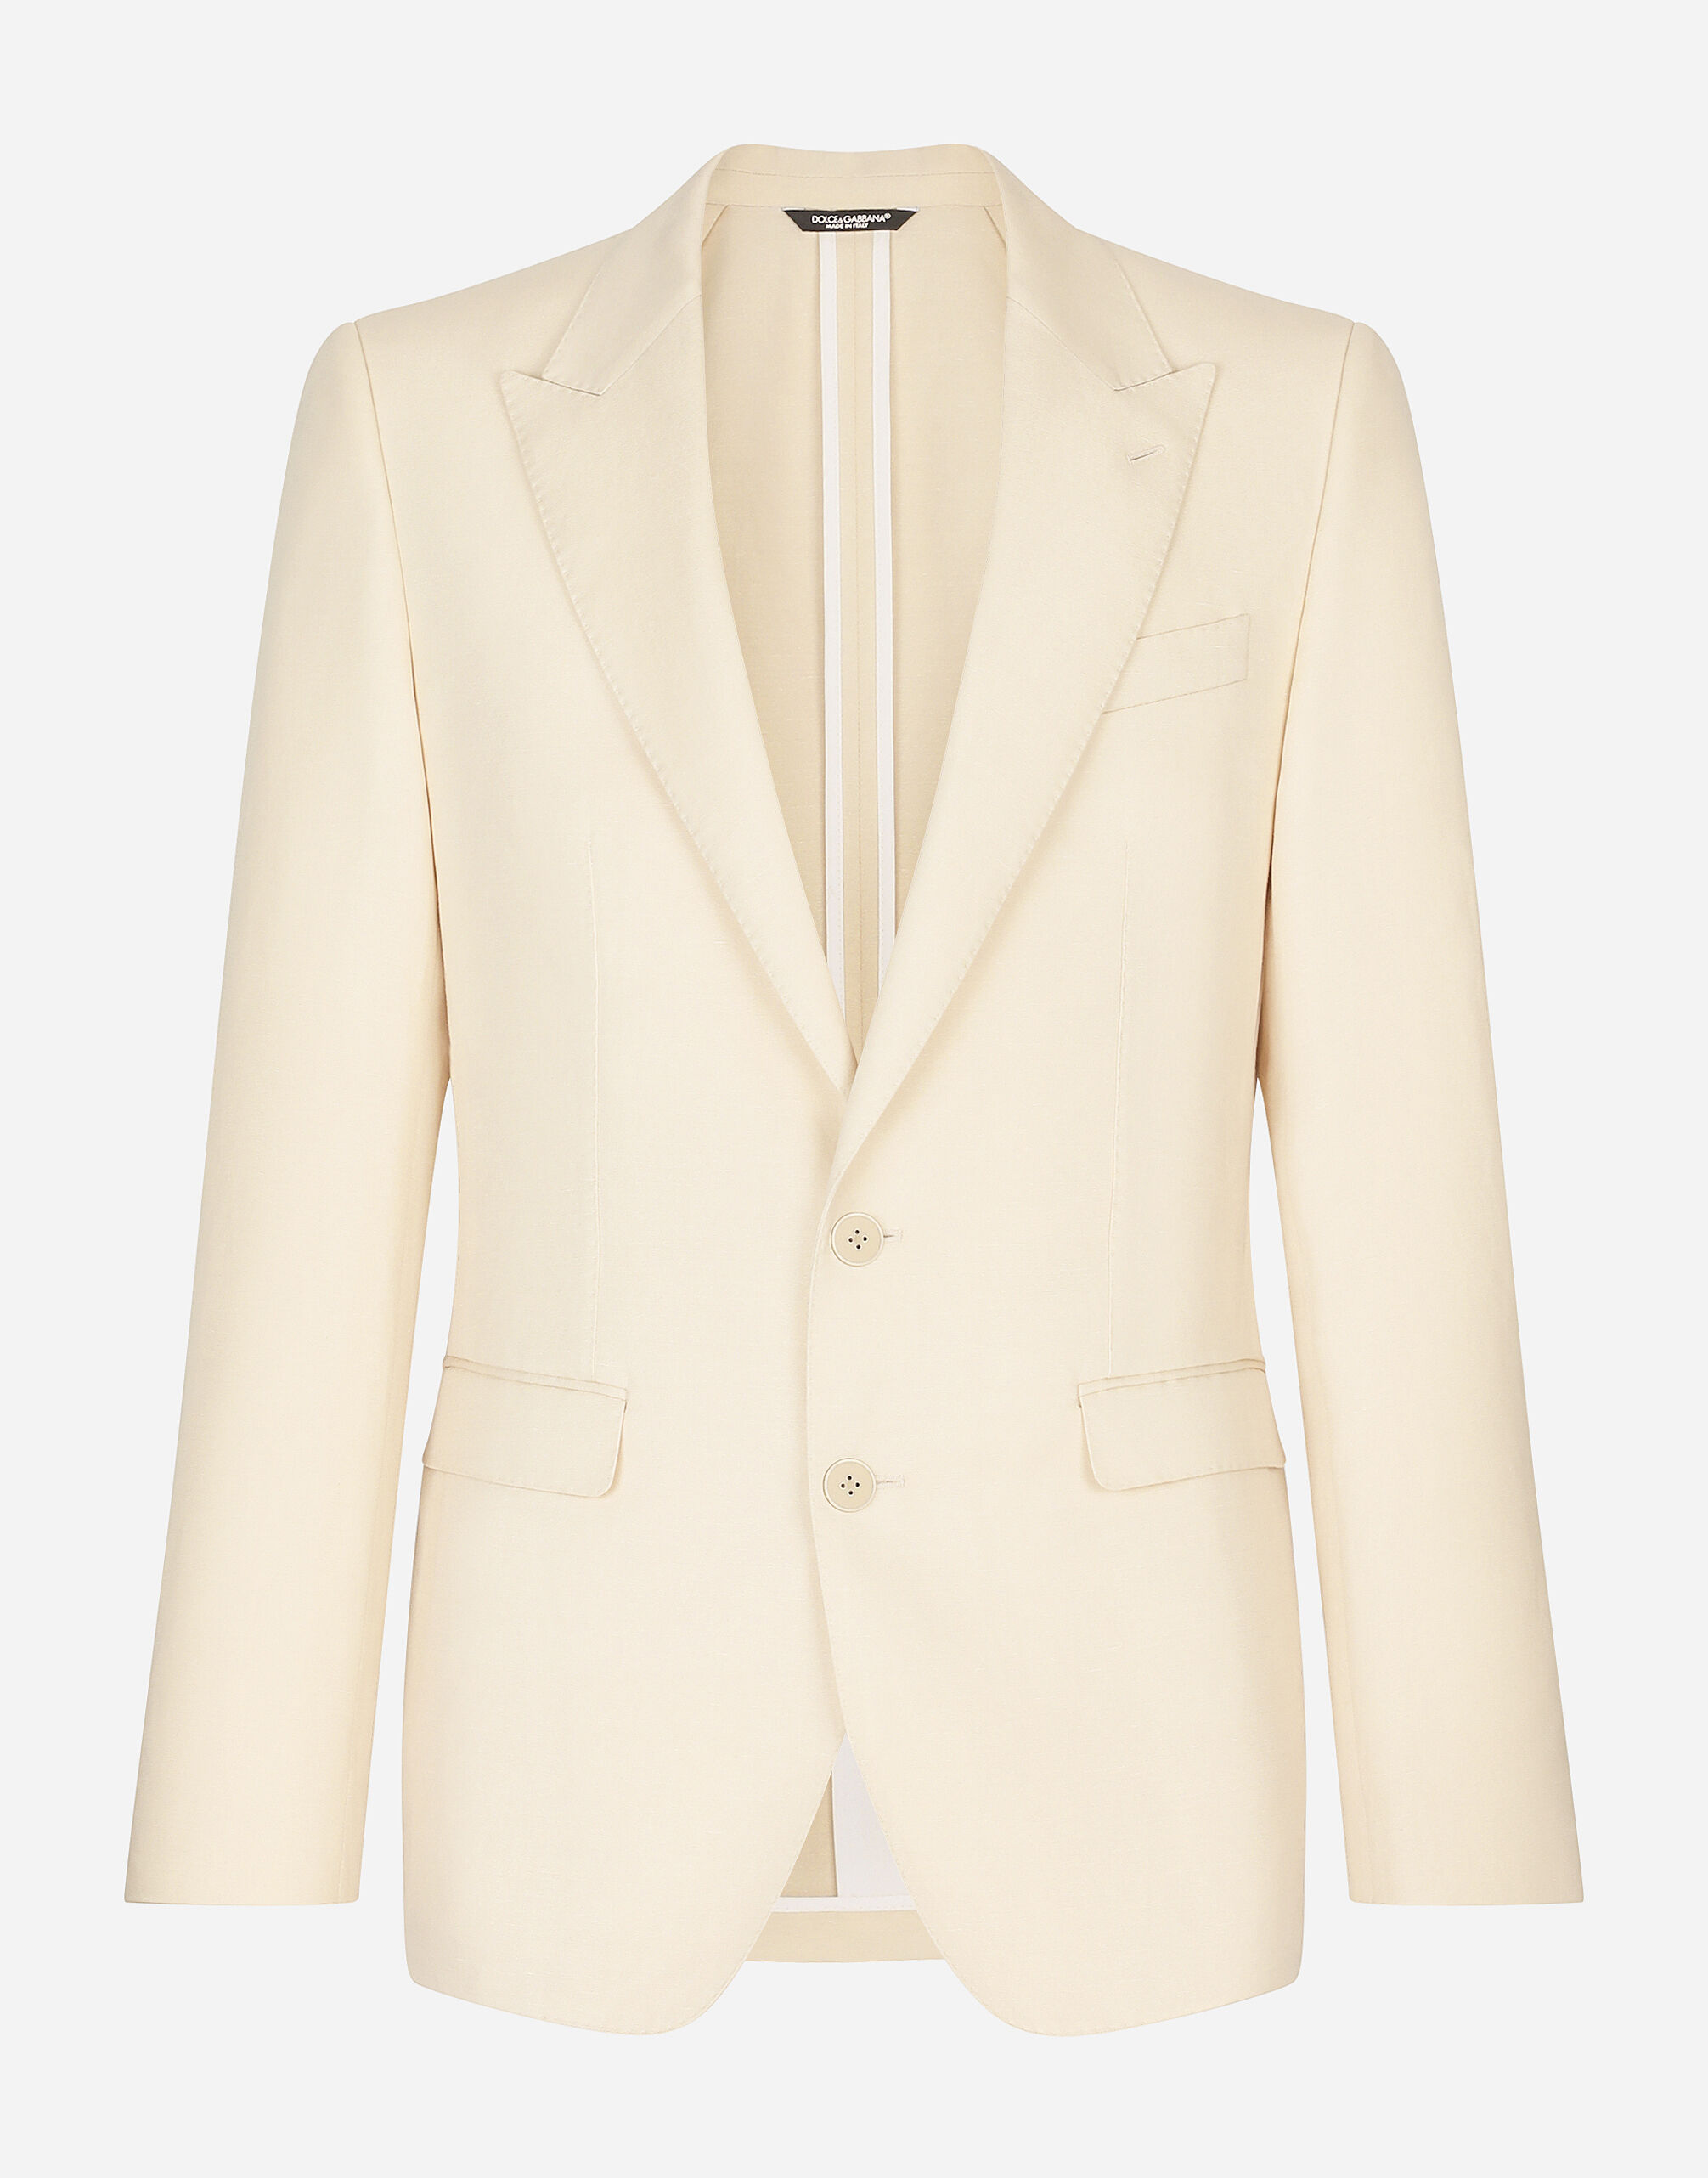 Dolce & Gabbana Single-breasted Taormina jacket in linen, cotton and silk Multicolor G2NW0TFU4L0